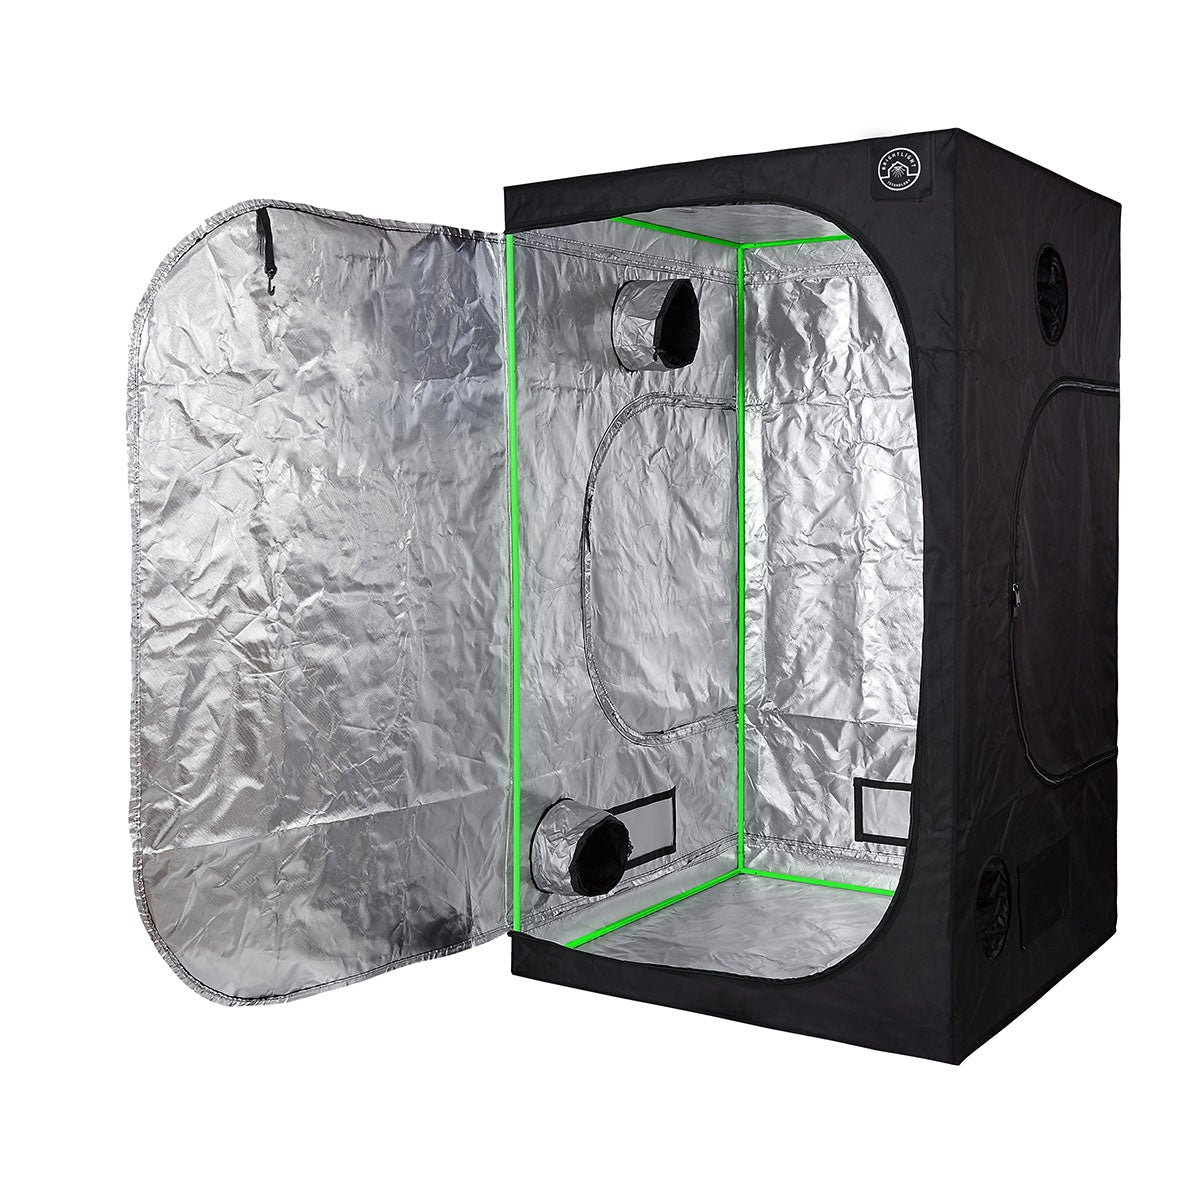 Growbox Completo PRO Led 150x150x200 - ASTROLED 2.0 680W